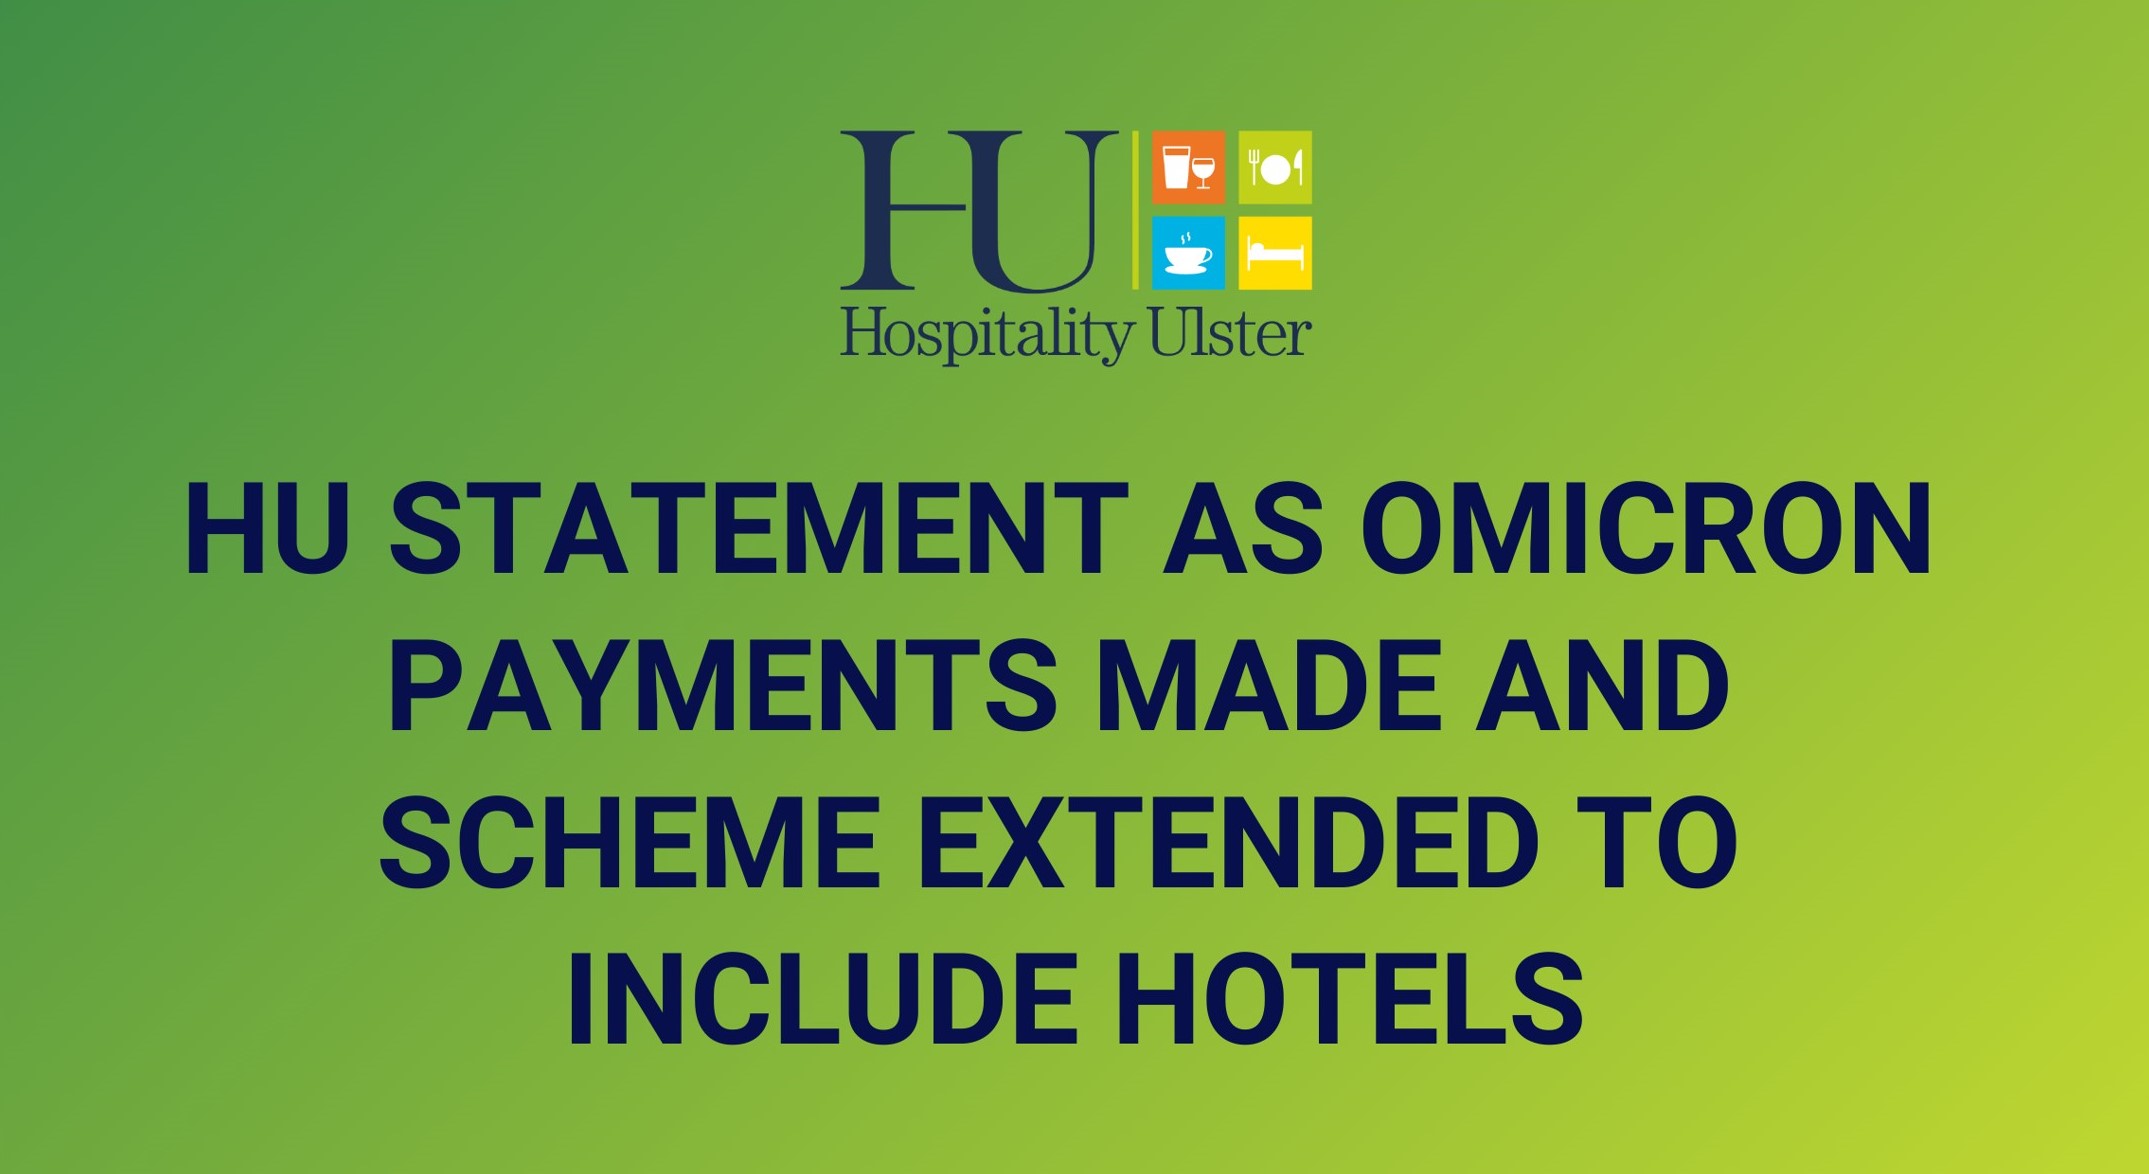 HU STATEMENT AS OMICRON PAYMENTS MADE AND SCHEME EXTENDED TO INCLUDE HOTELS